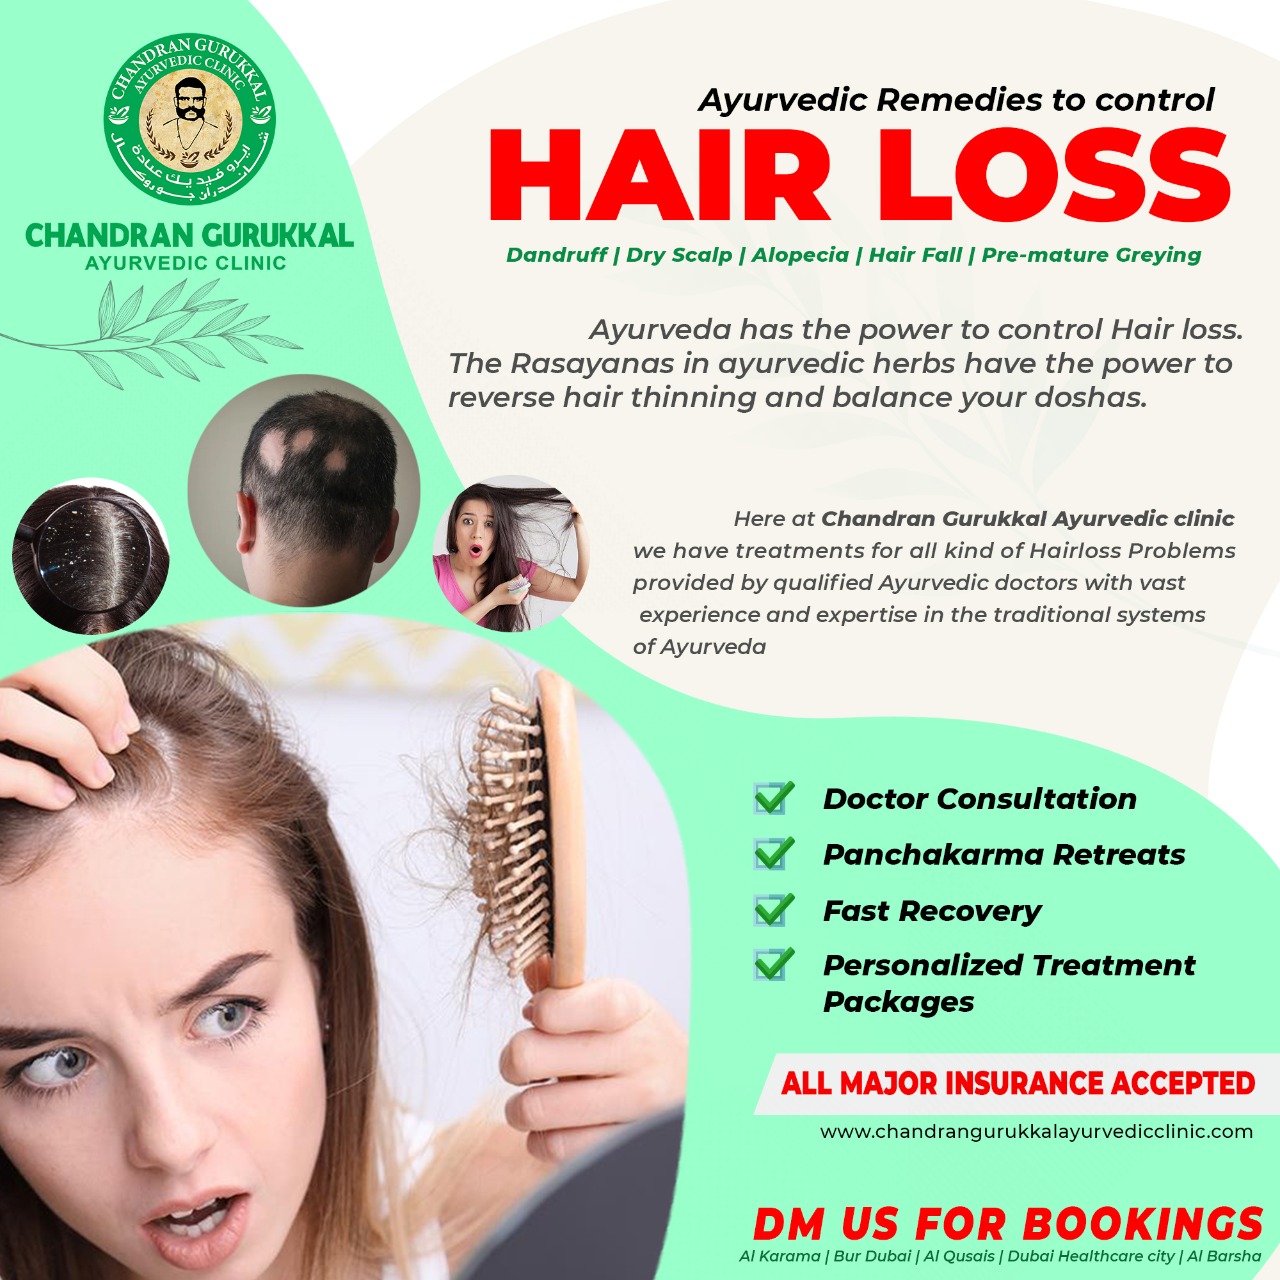 Facing Severe hair fall? Grow your Hairs naturally with us!